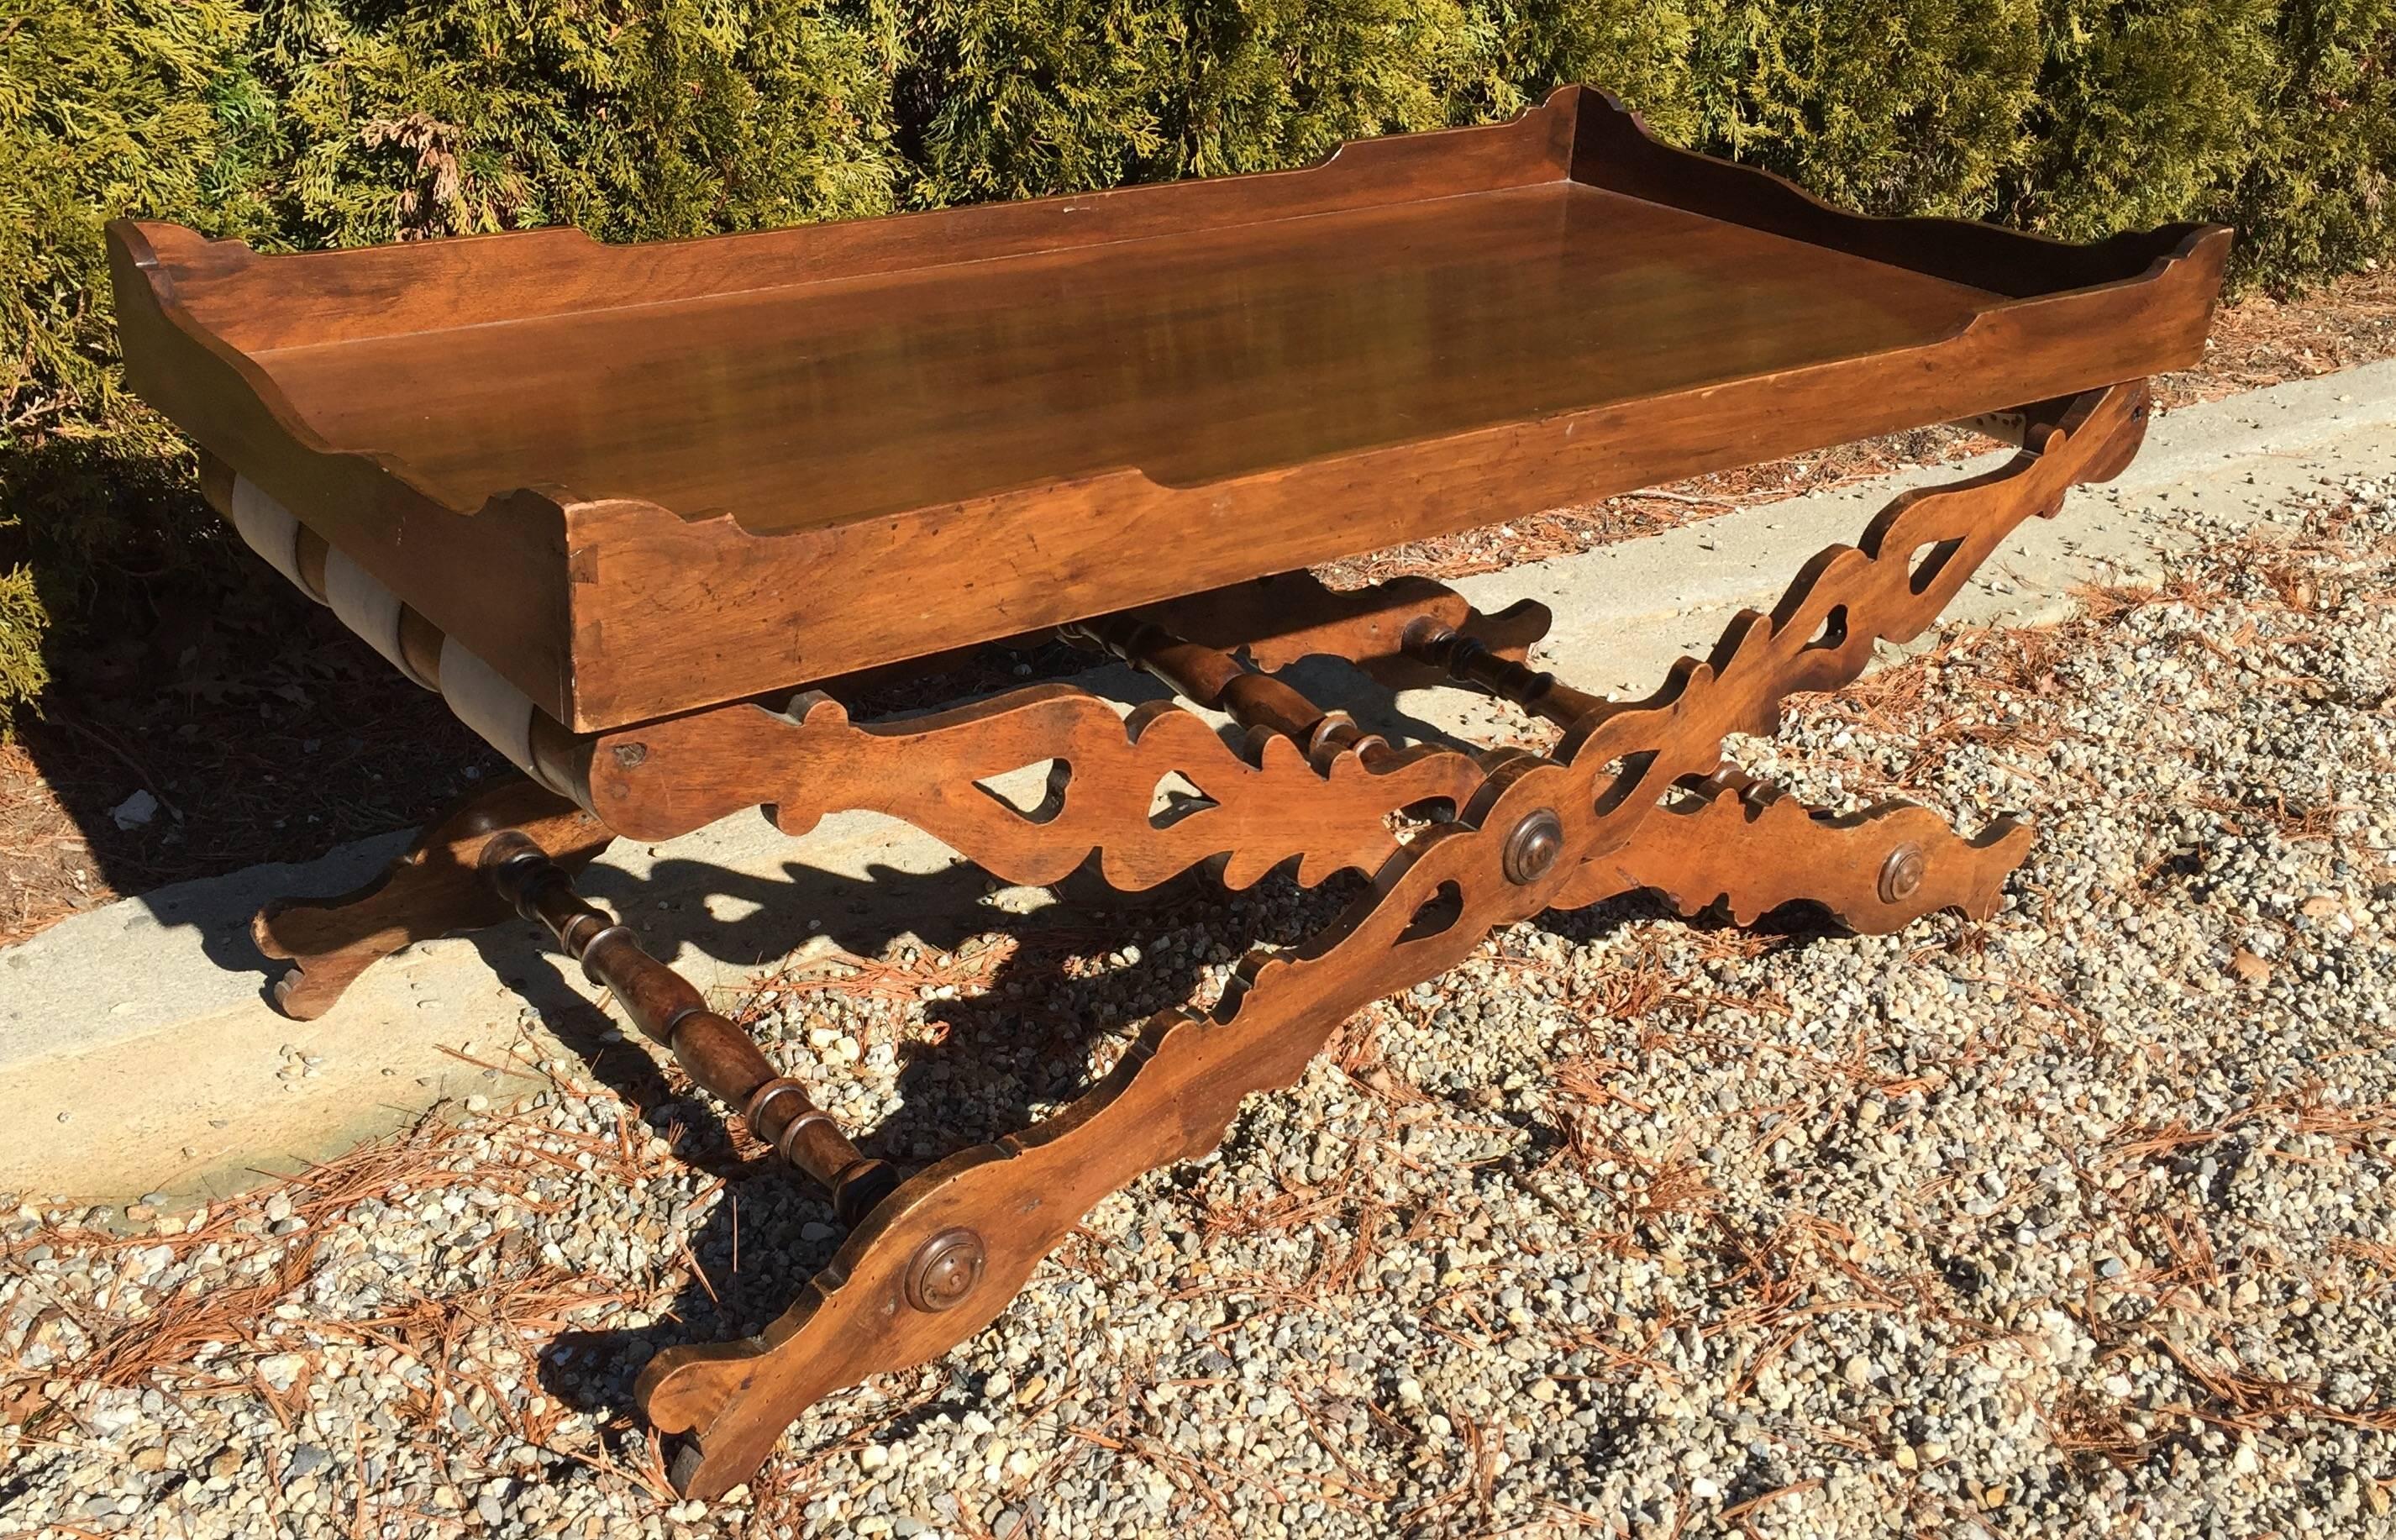 This early 19th Century English Walnut Butler's tray table was converted to a 47